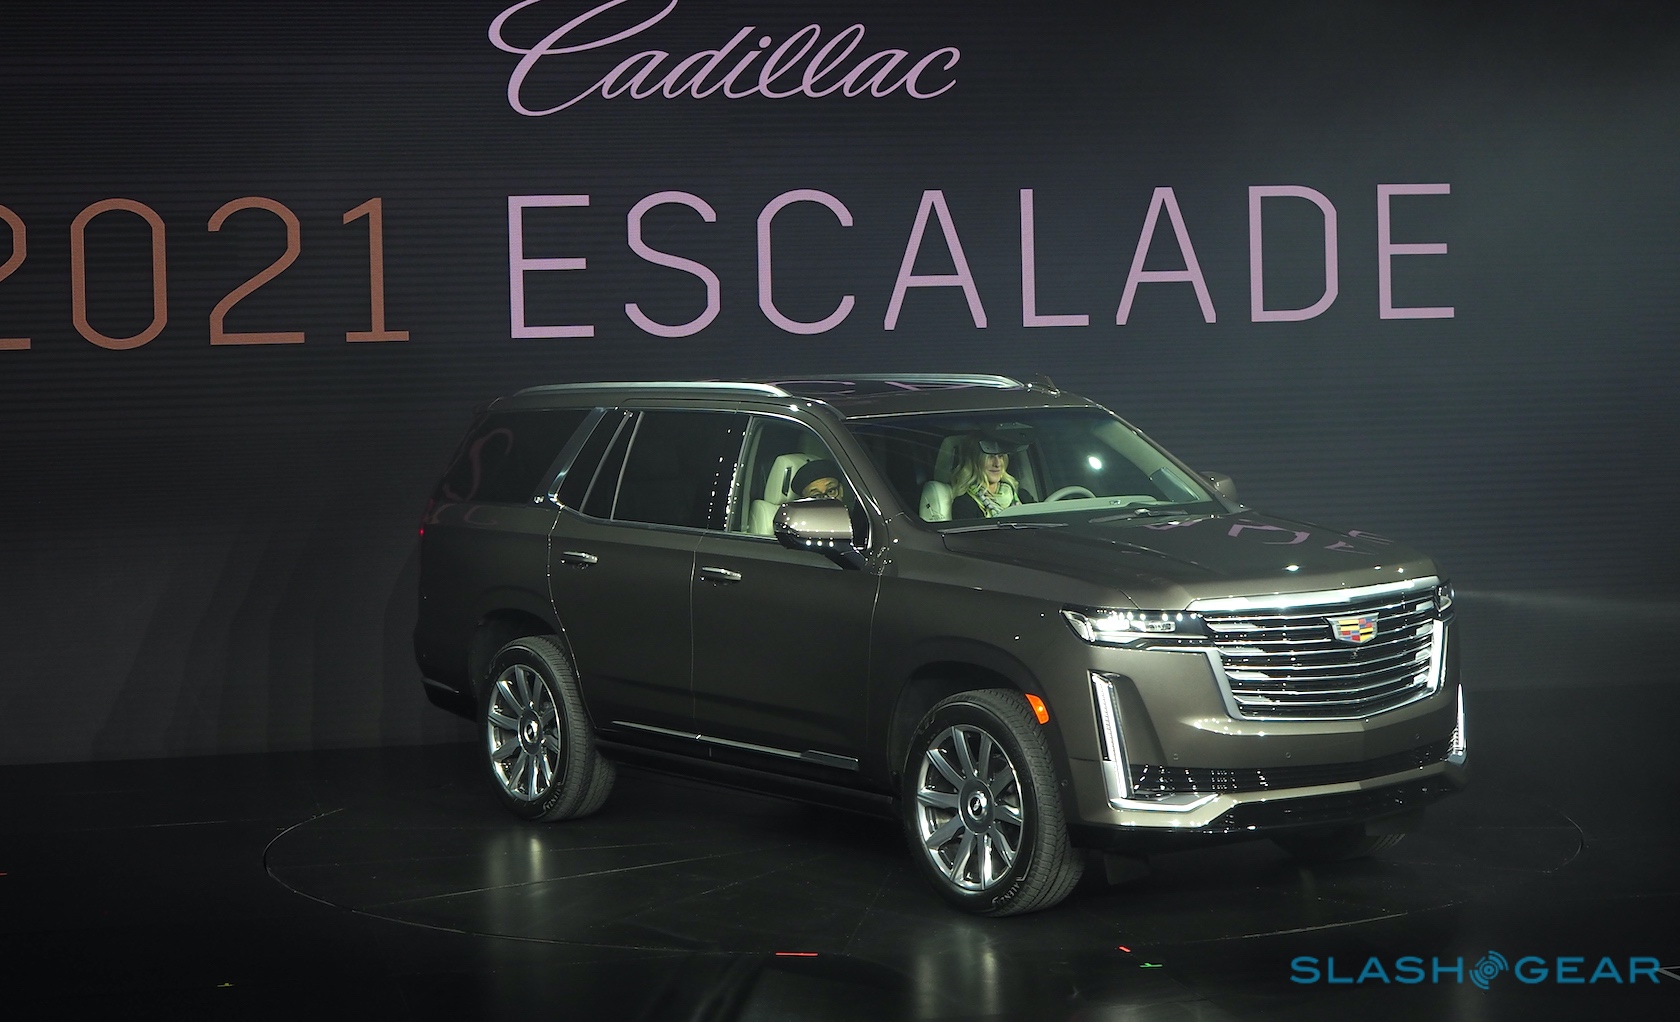 2021 Cadillac Escalade Official Legendary Suv Gets More Space And